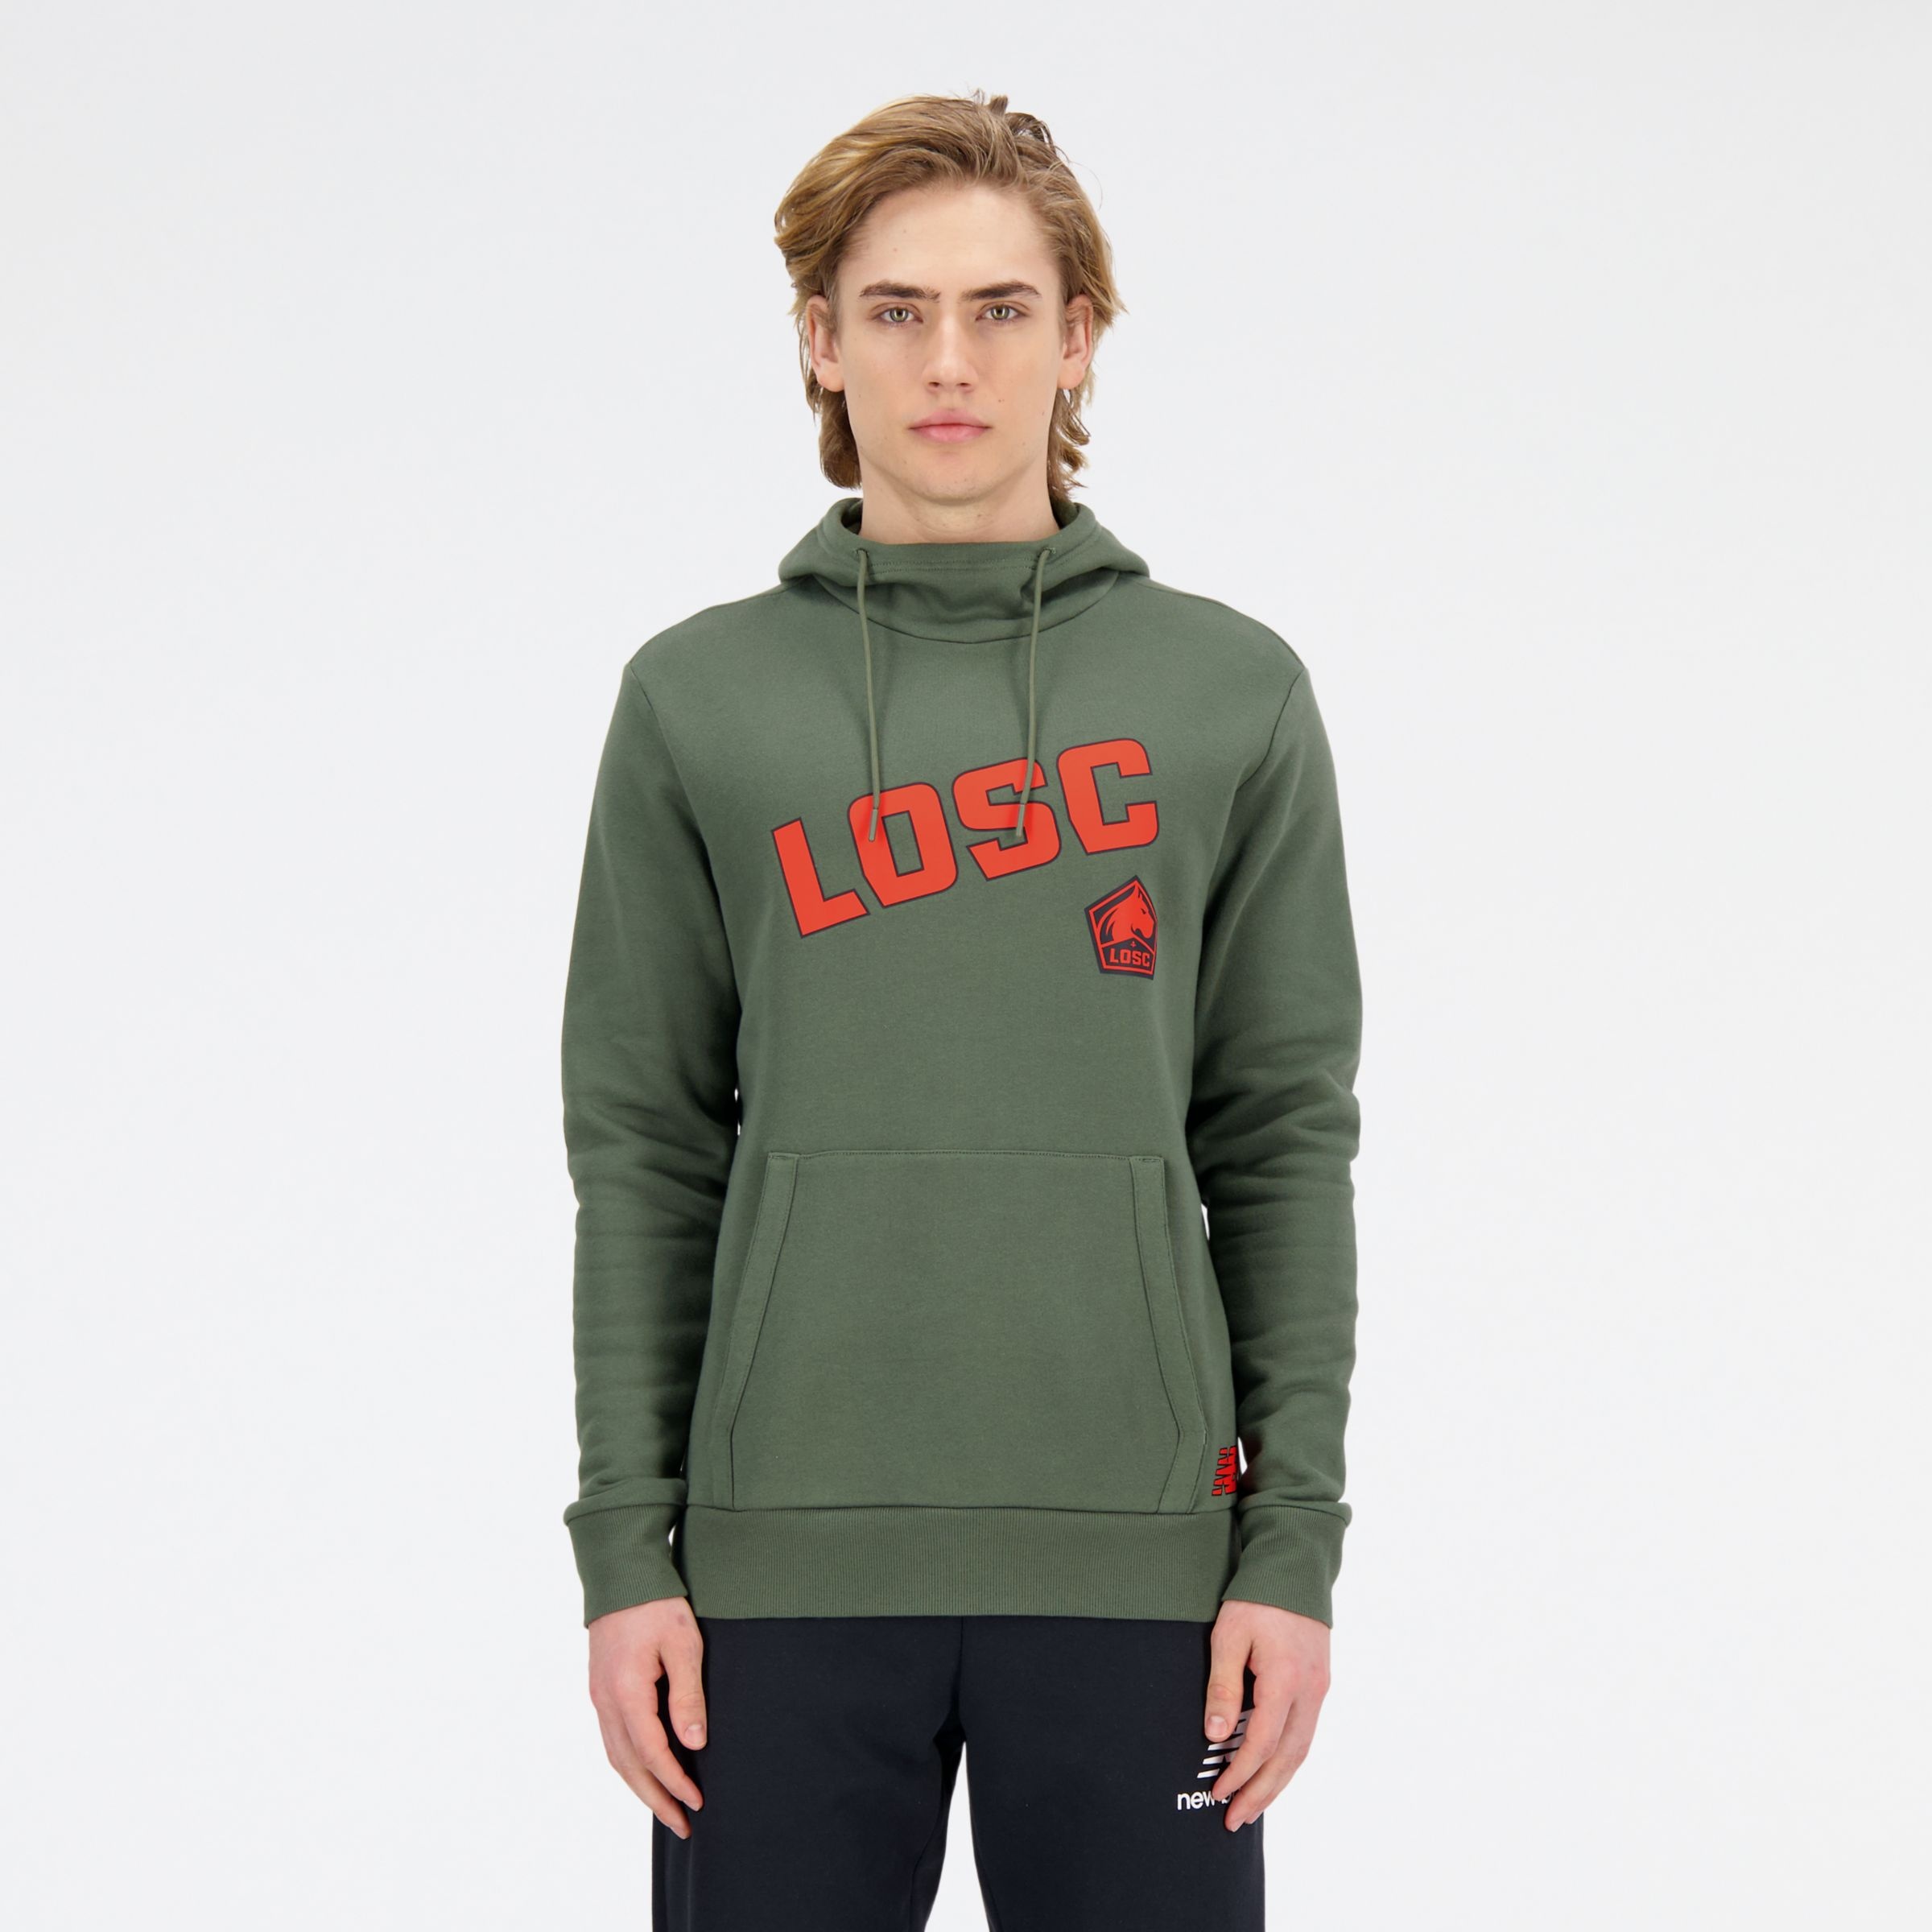 LOSC Lille Graphic Overhead Hoodie - 4